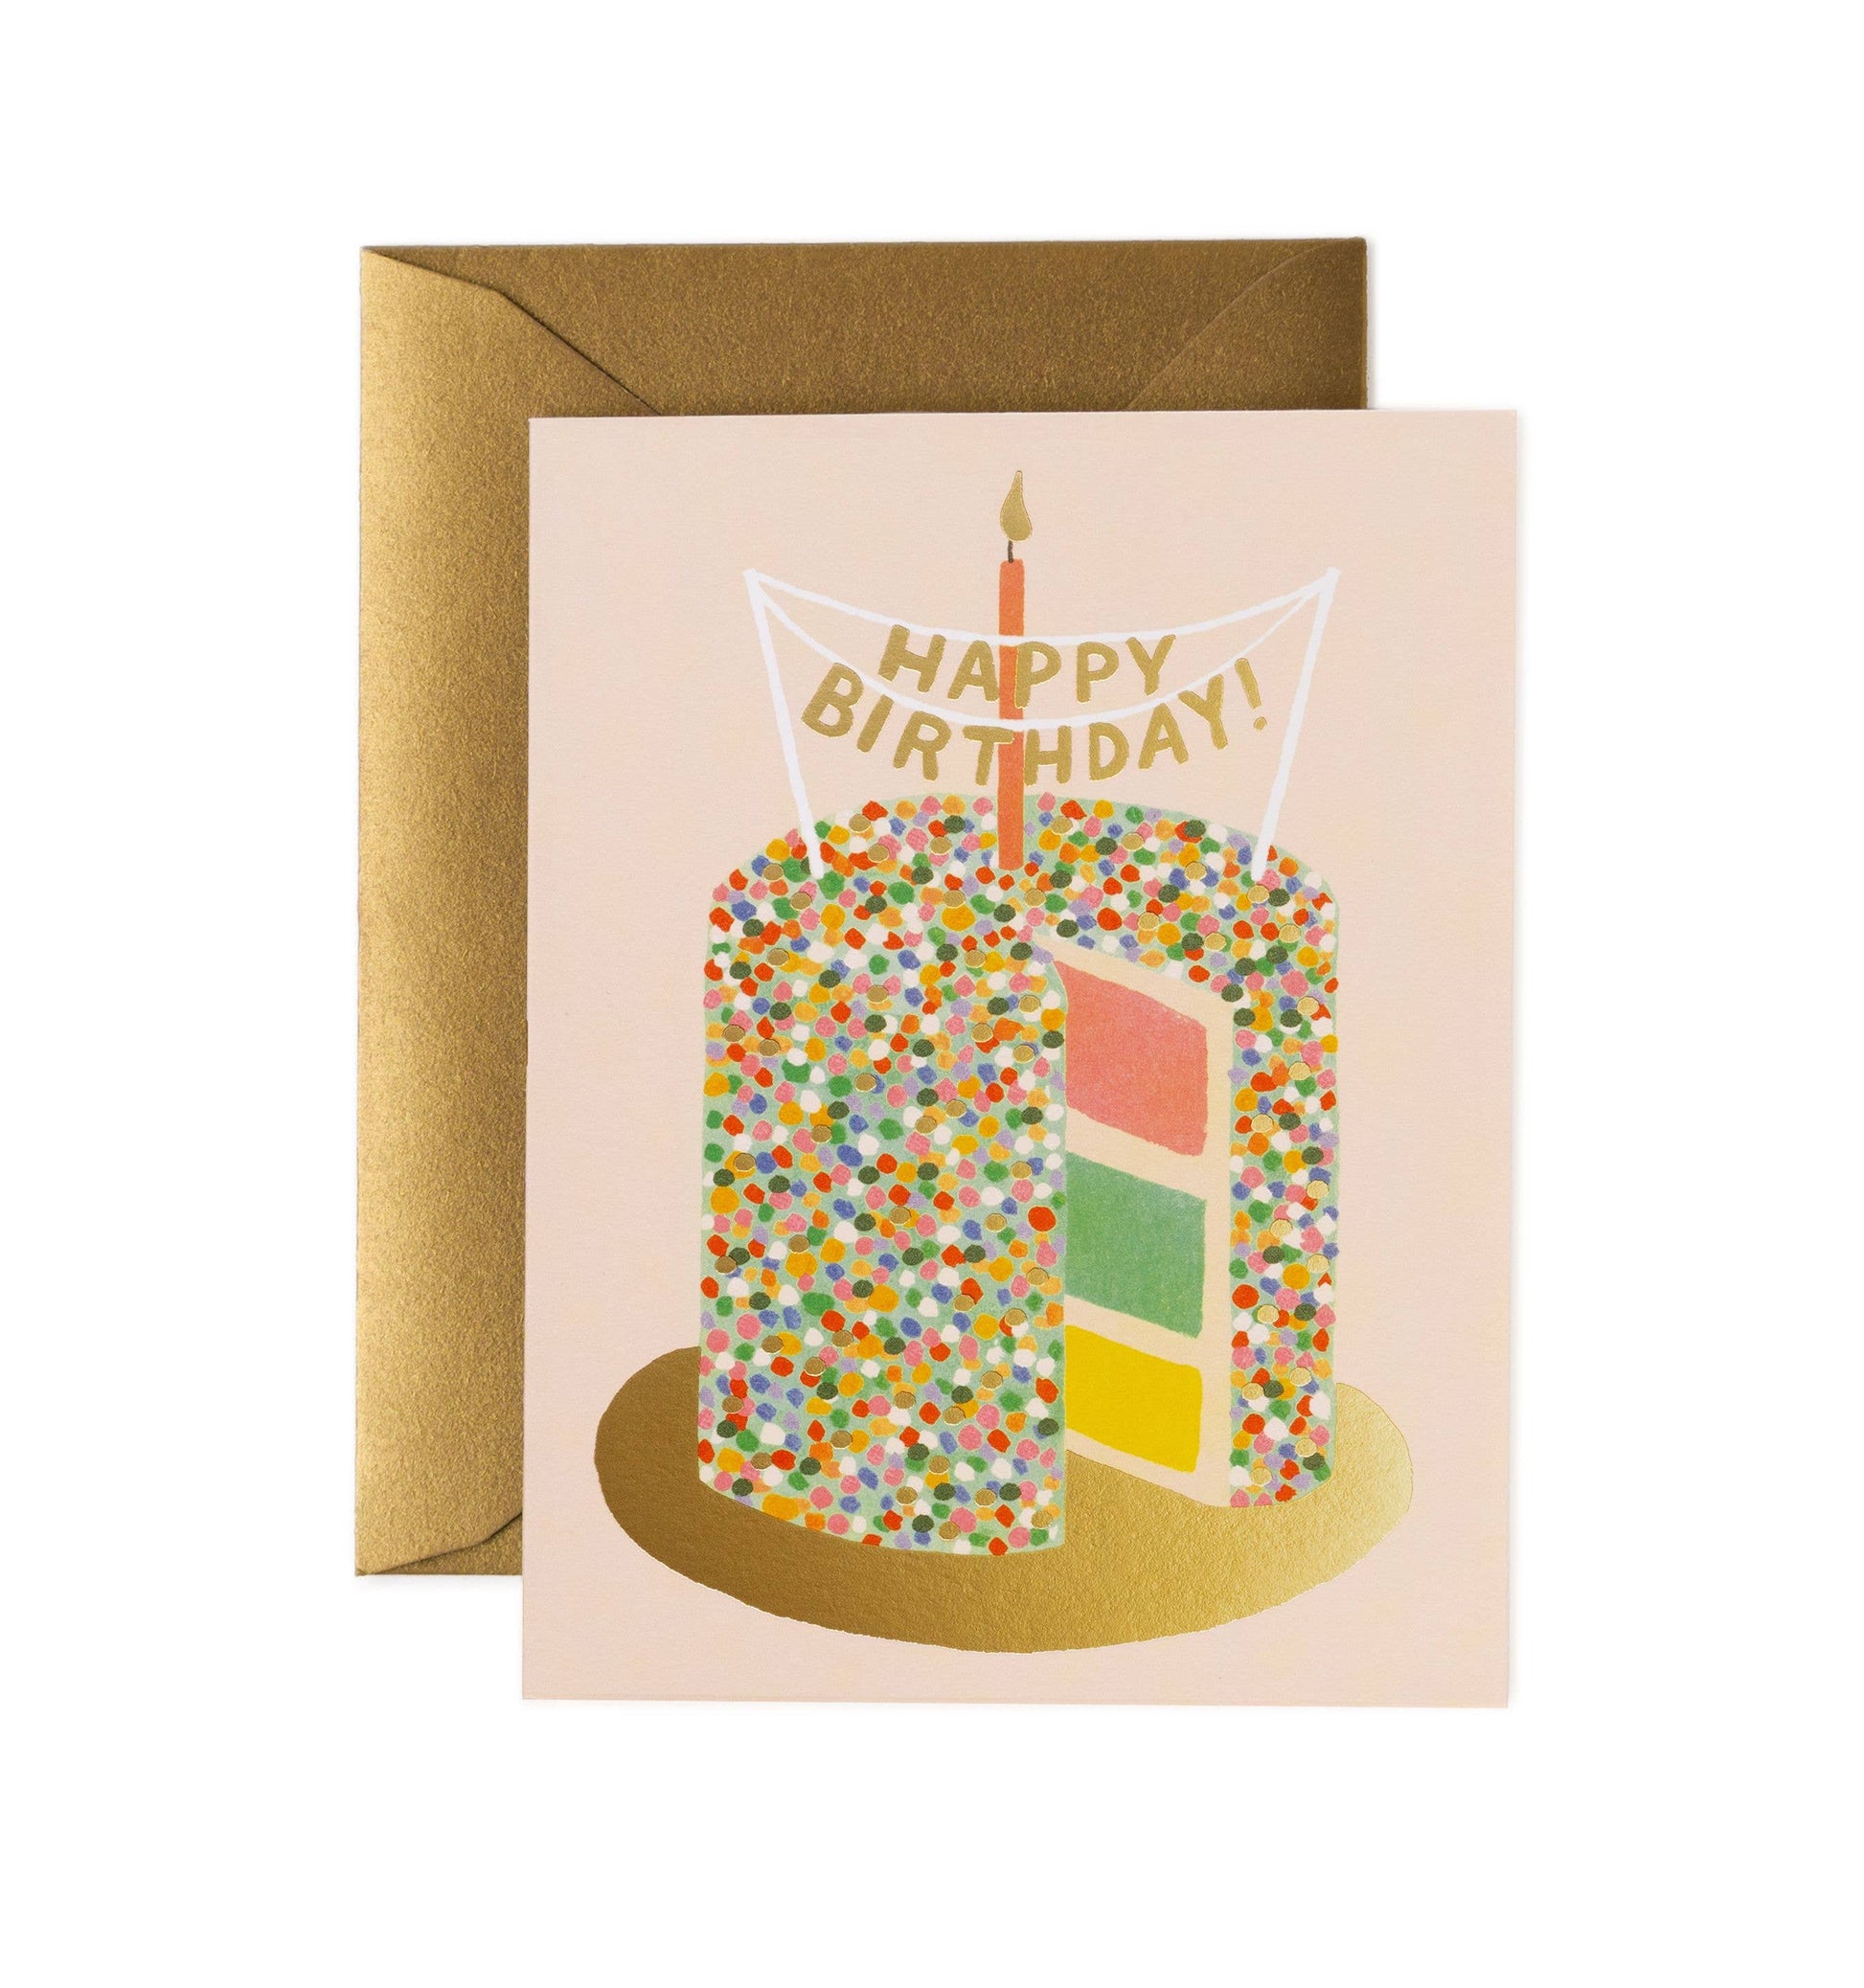 Greeting card with illustration of a birthday cake covered in colorful round sprinkles with a single candle on top and a cake topper that says "Happy Birthday!" A single slice has been taken out of the cake and you can see three layers on the inside - pink, yellow, and mint colored.